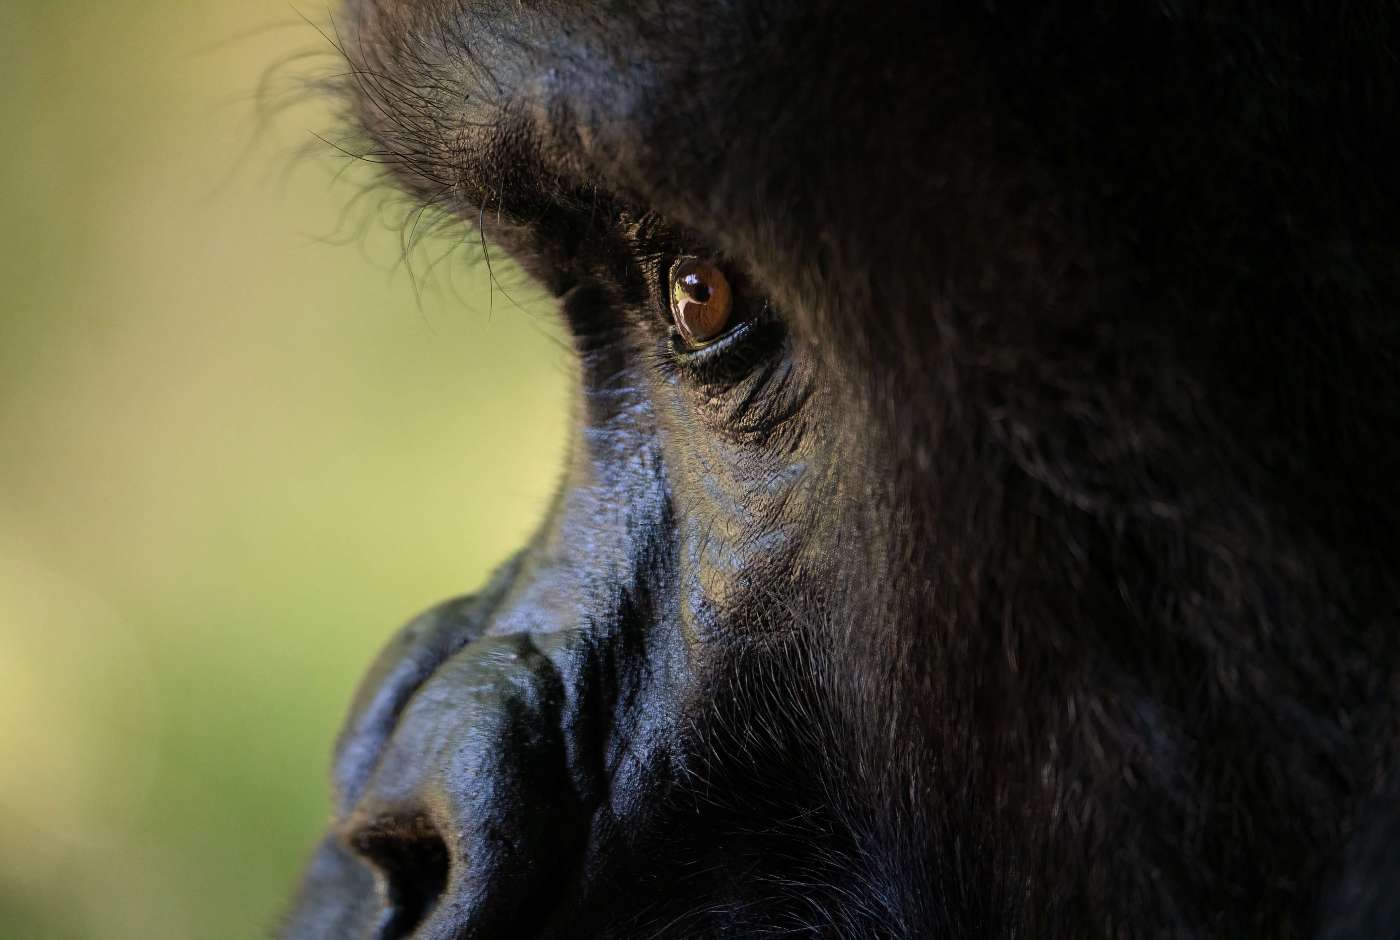 Close up side profile of a gorilla's face with a blurry green background